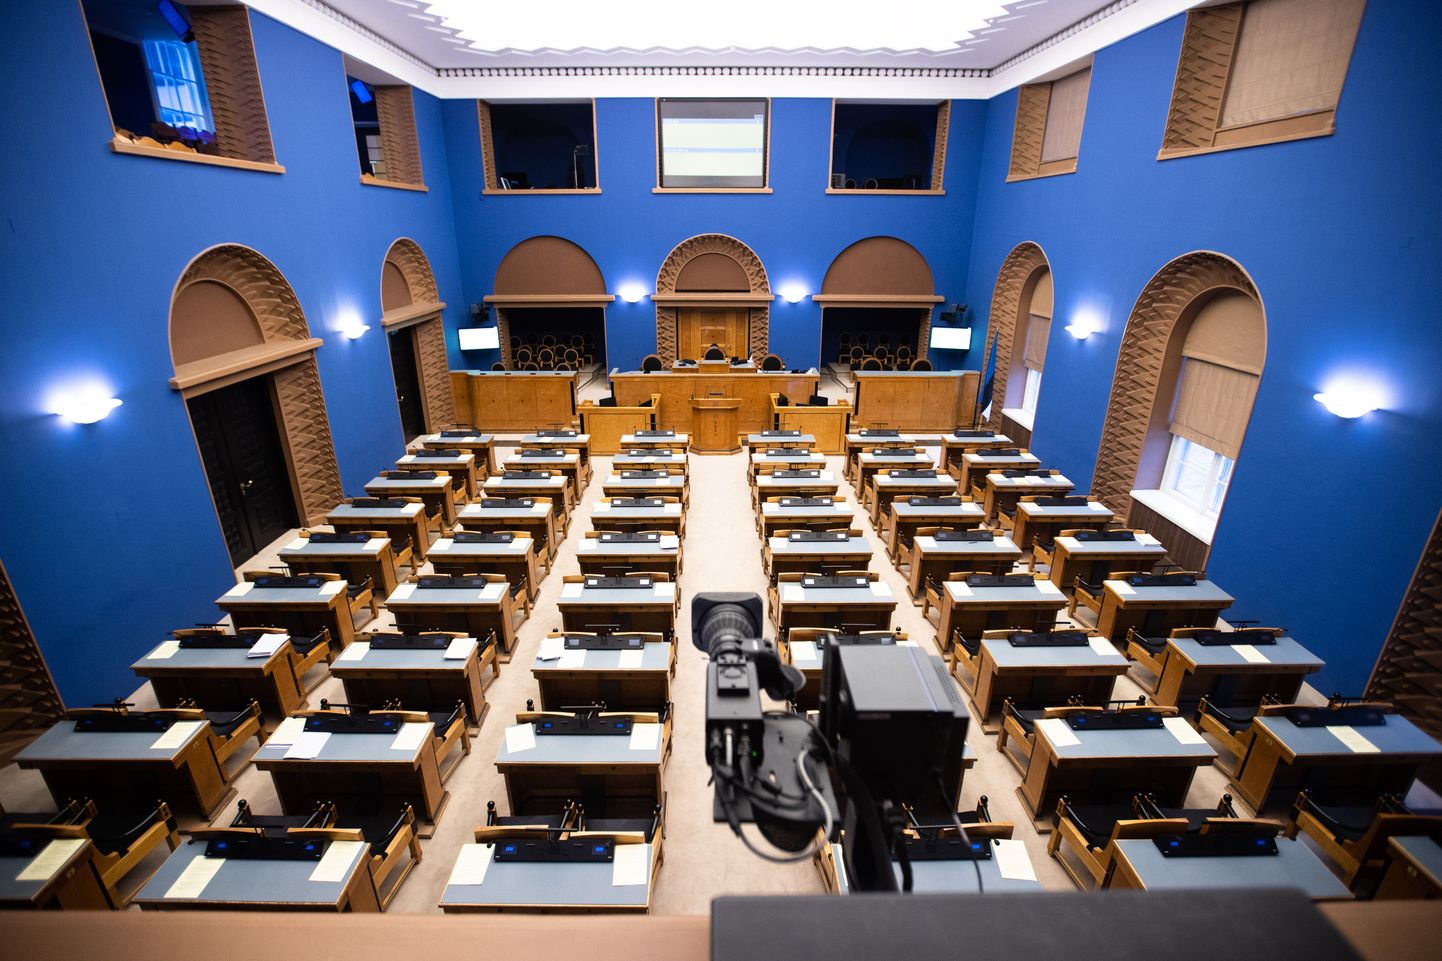 The Riigikogu will hold sessions remotely at least until the end of this week.